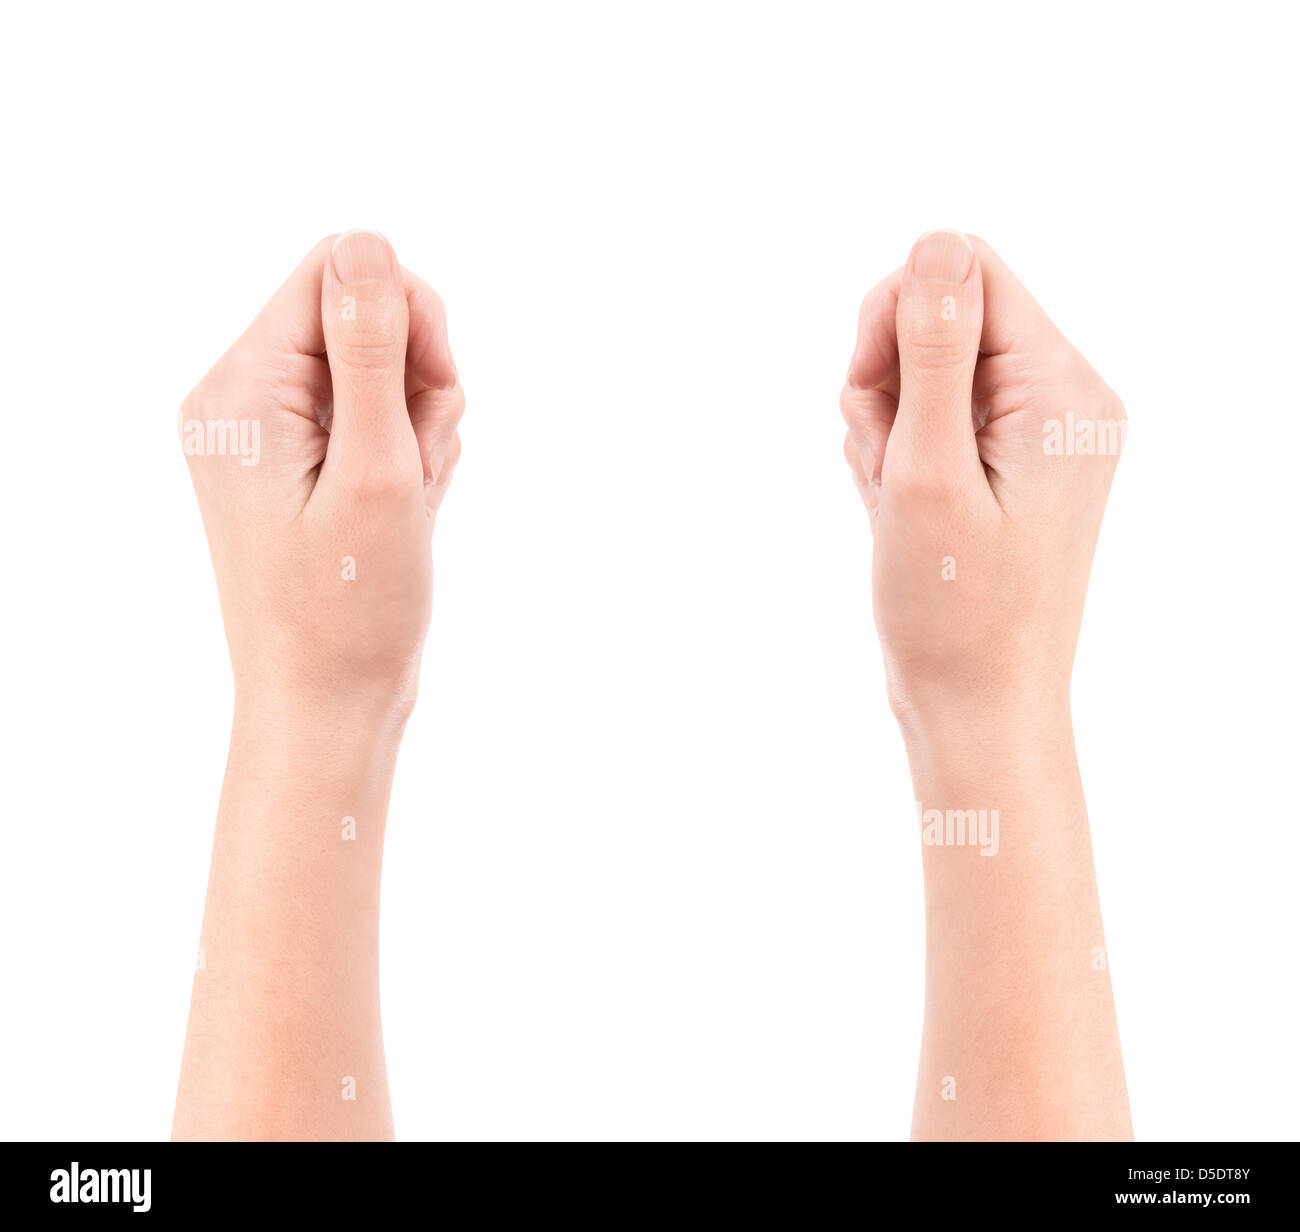 Two hands are holding imaginary item concept. Isolated on white. Stock Photo